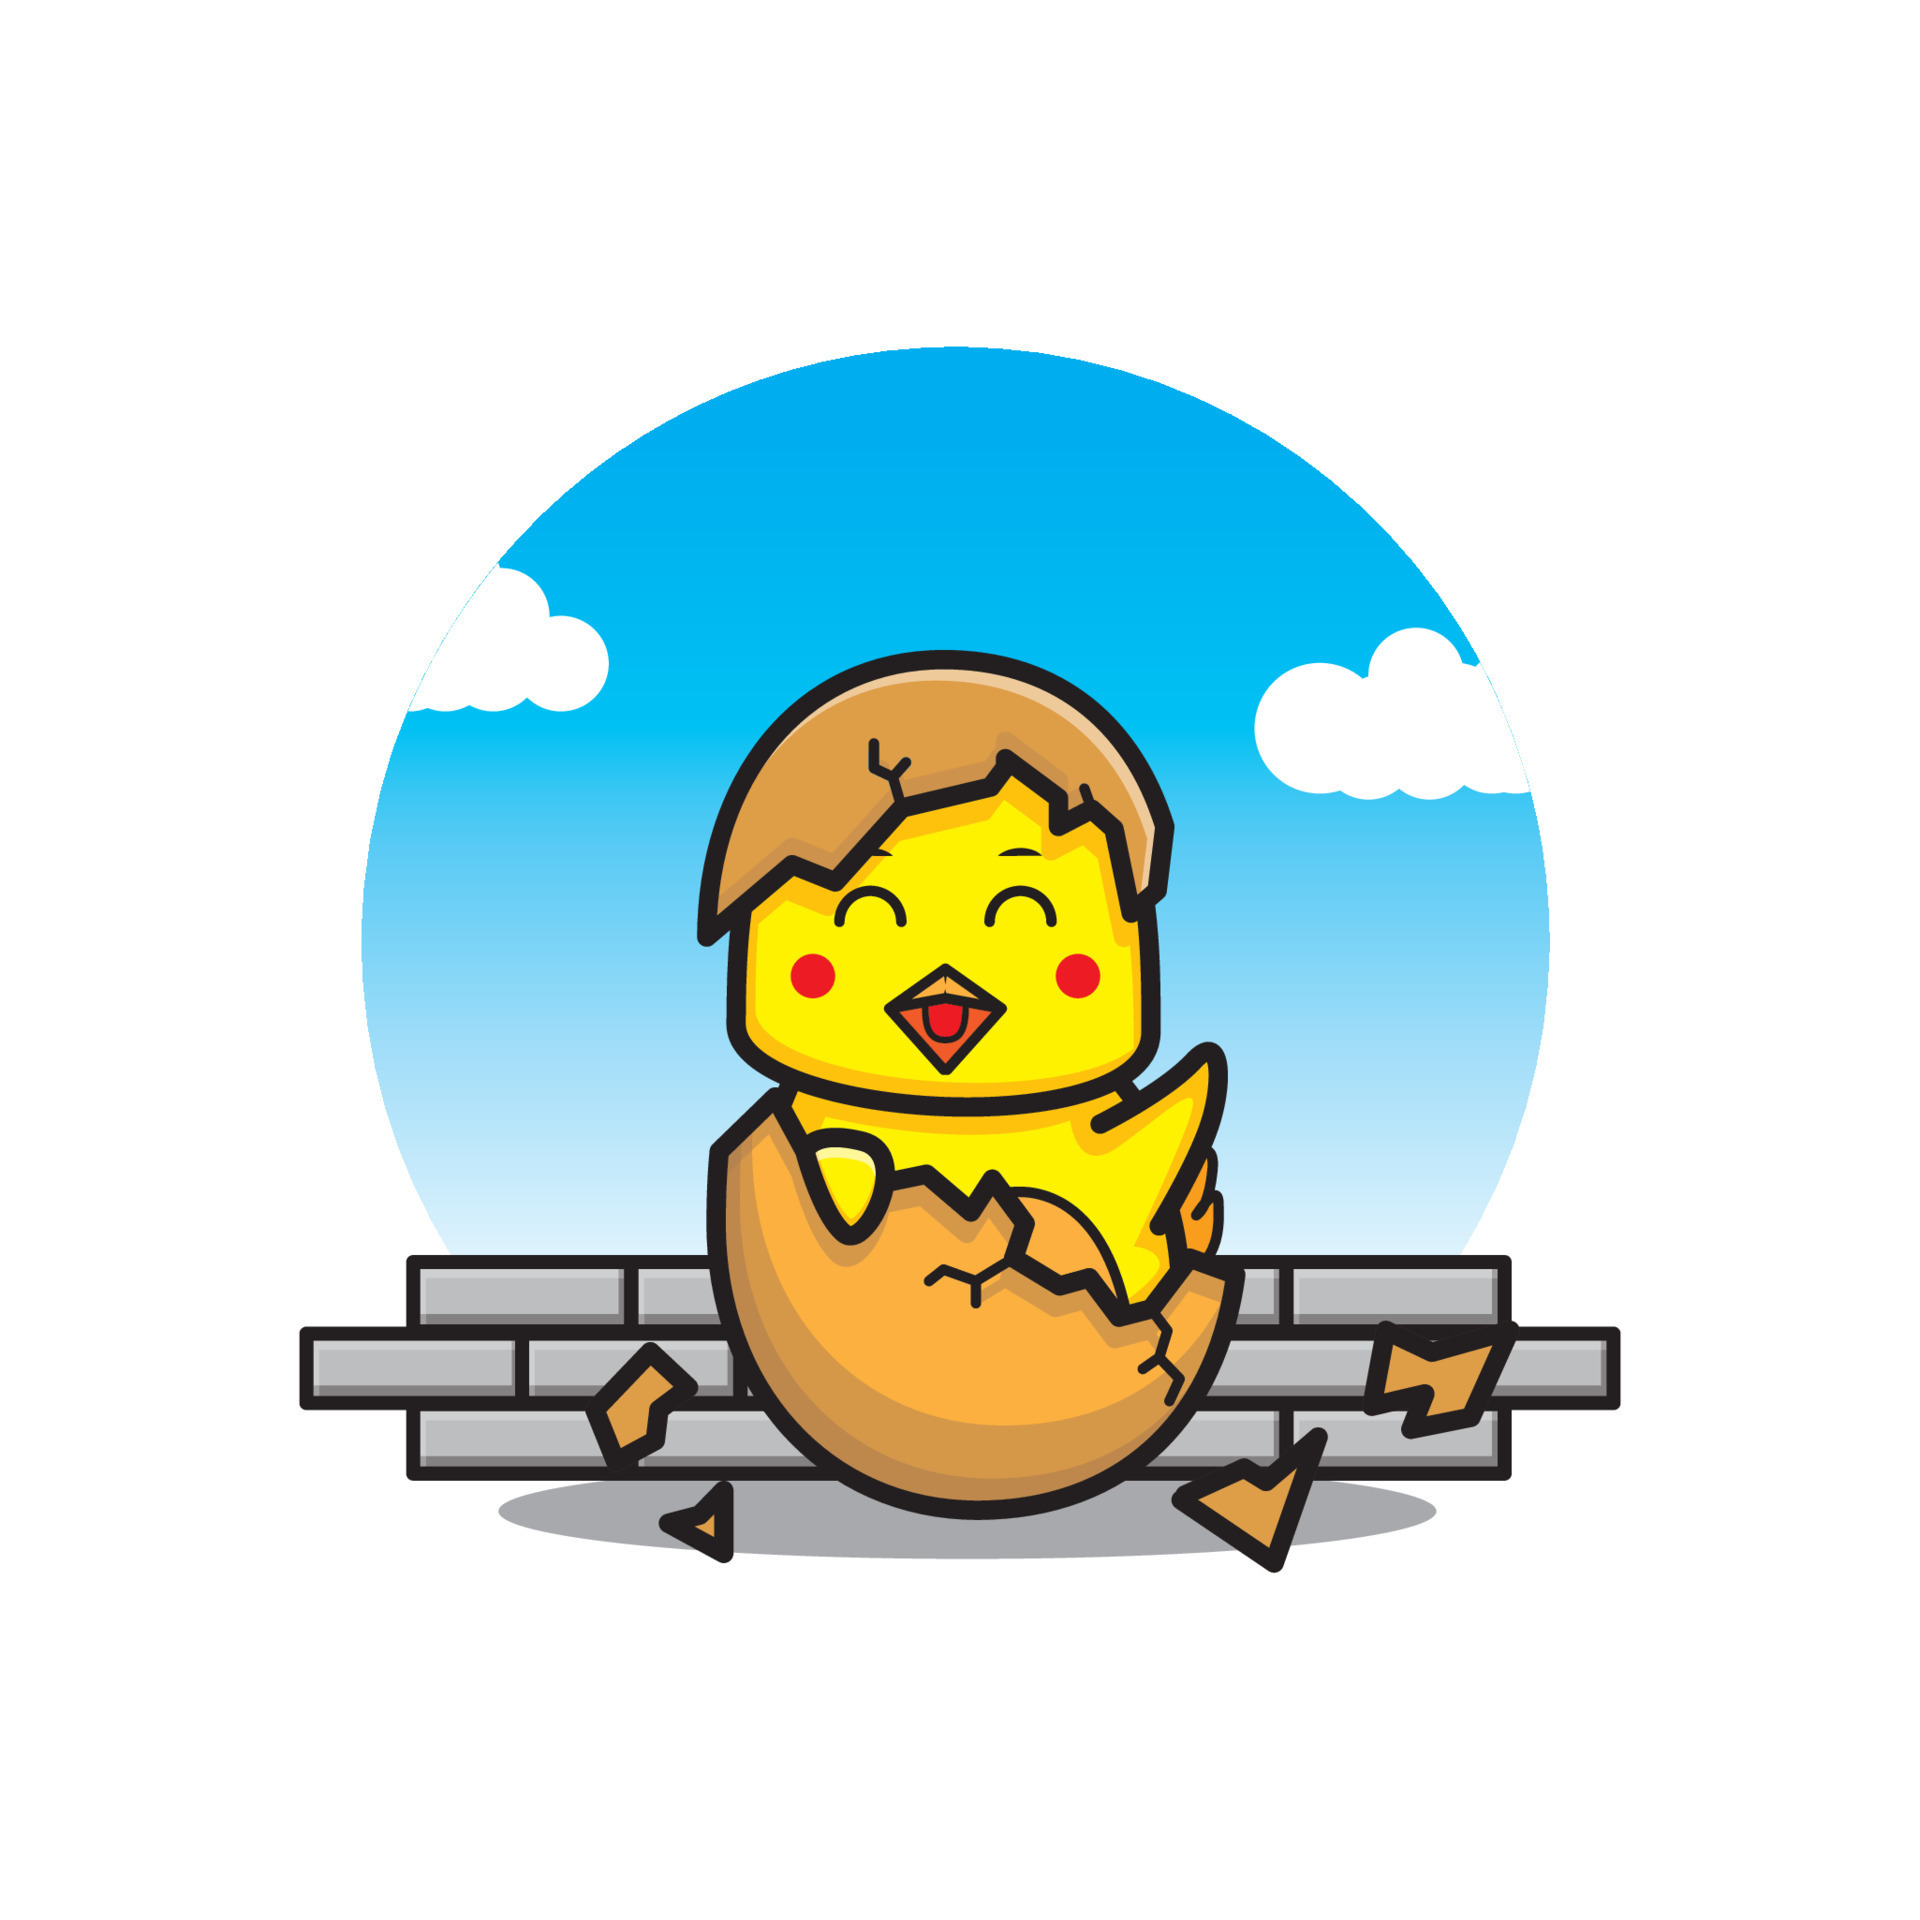 https://static.vecteezy.com/system/resources/previews/010/683/458/original/cute-happy-little-chick-cartoon-just-hatched-from-eggs-vector.jpg